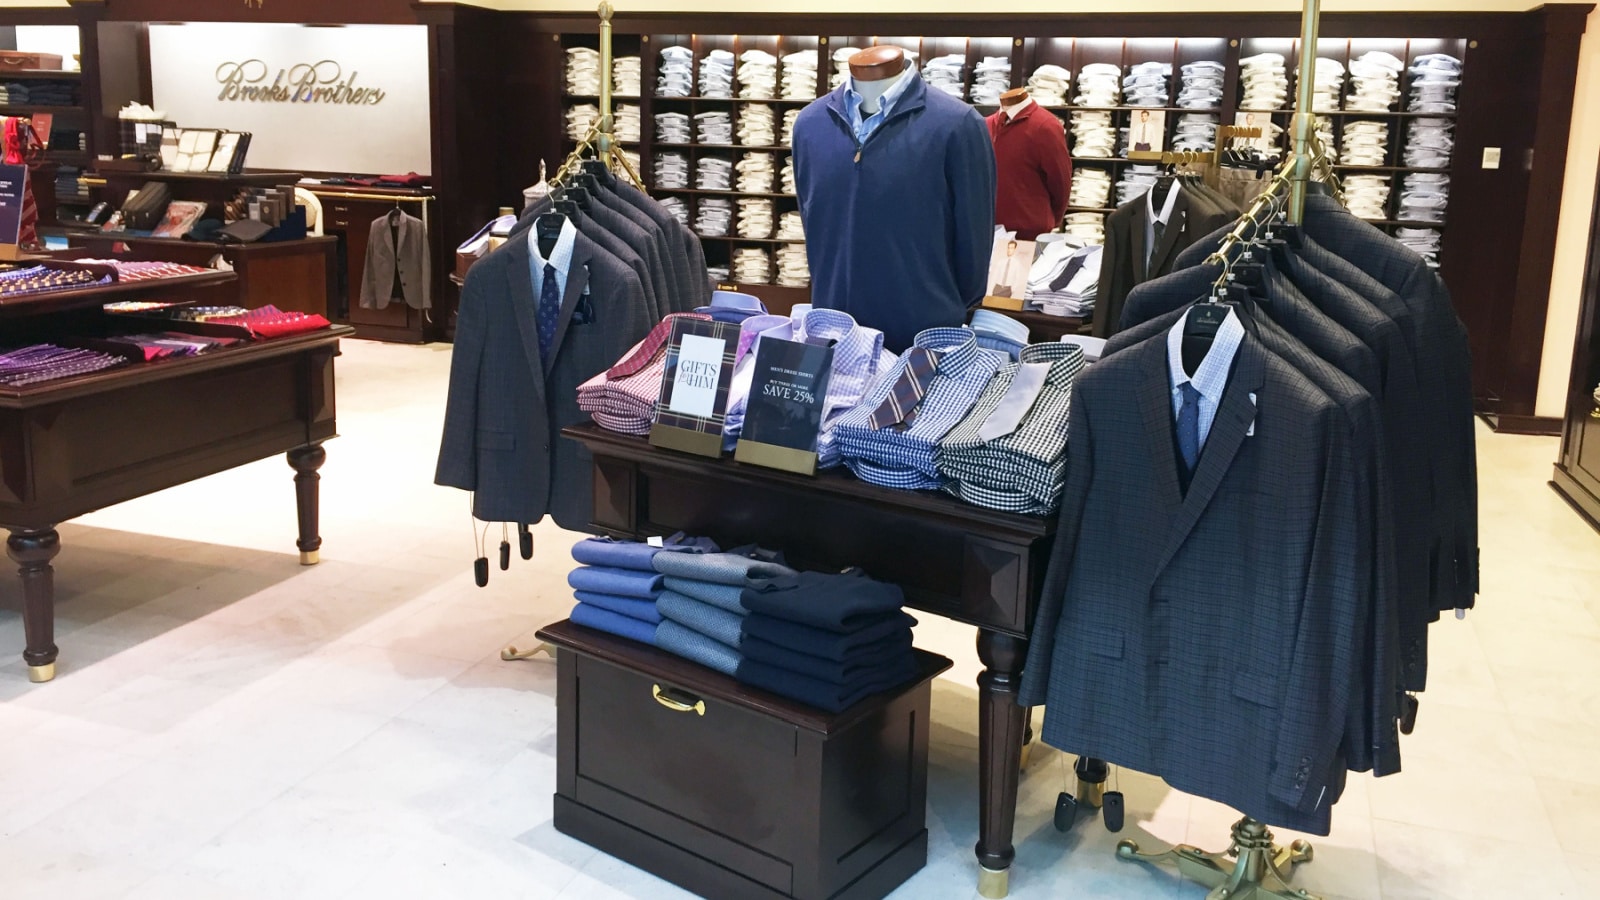 JACKSONVILLE, FL-DECEMBER 16, 2016: Interior of a Brooks Brothers clothing store.